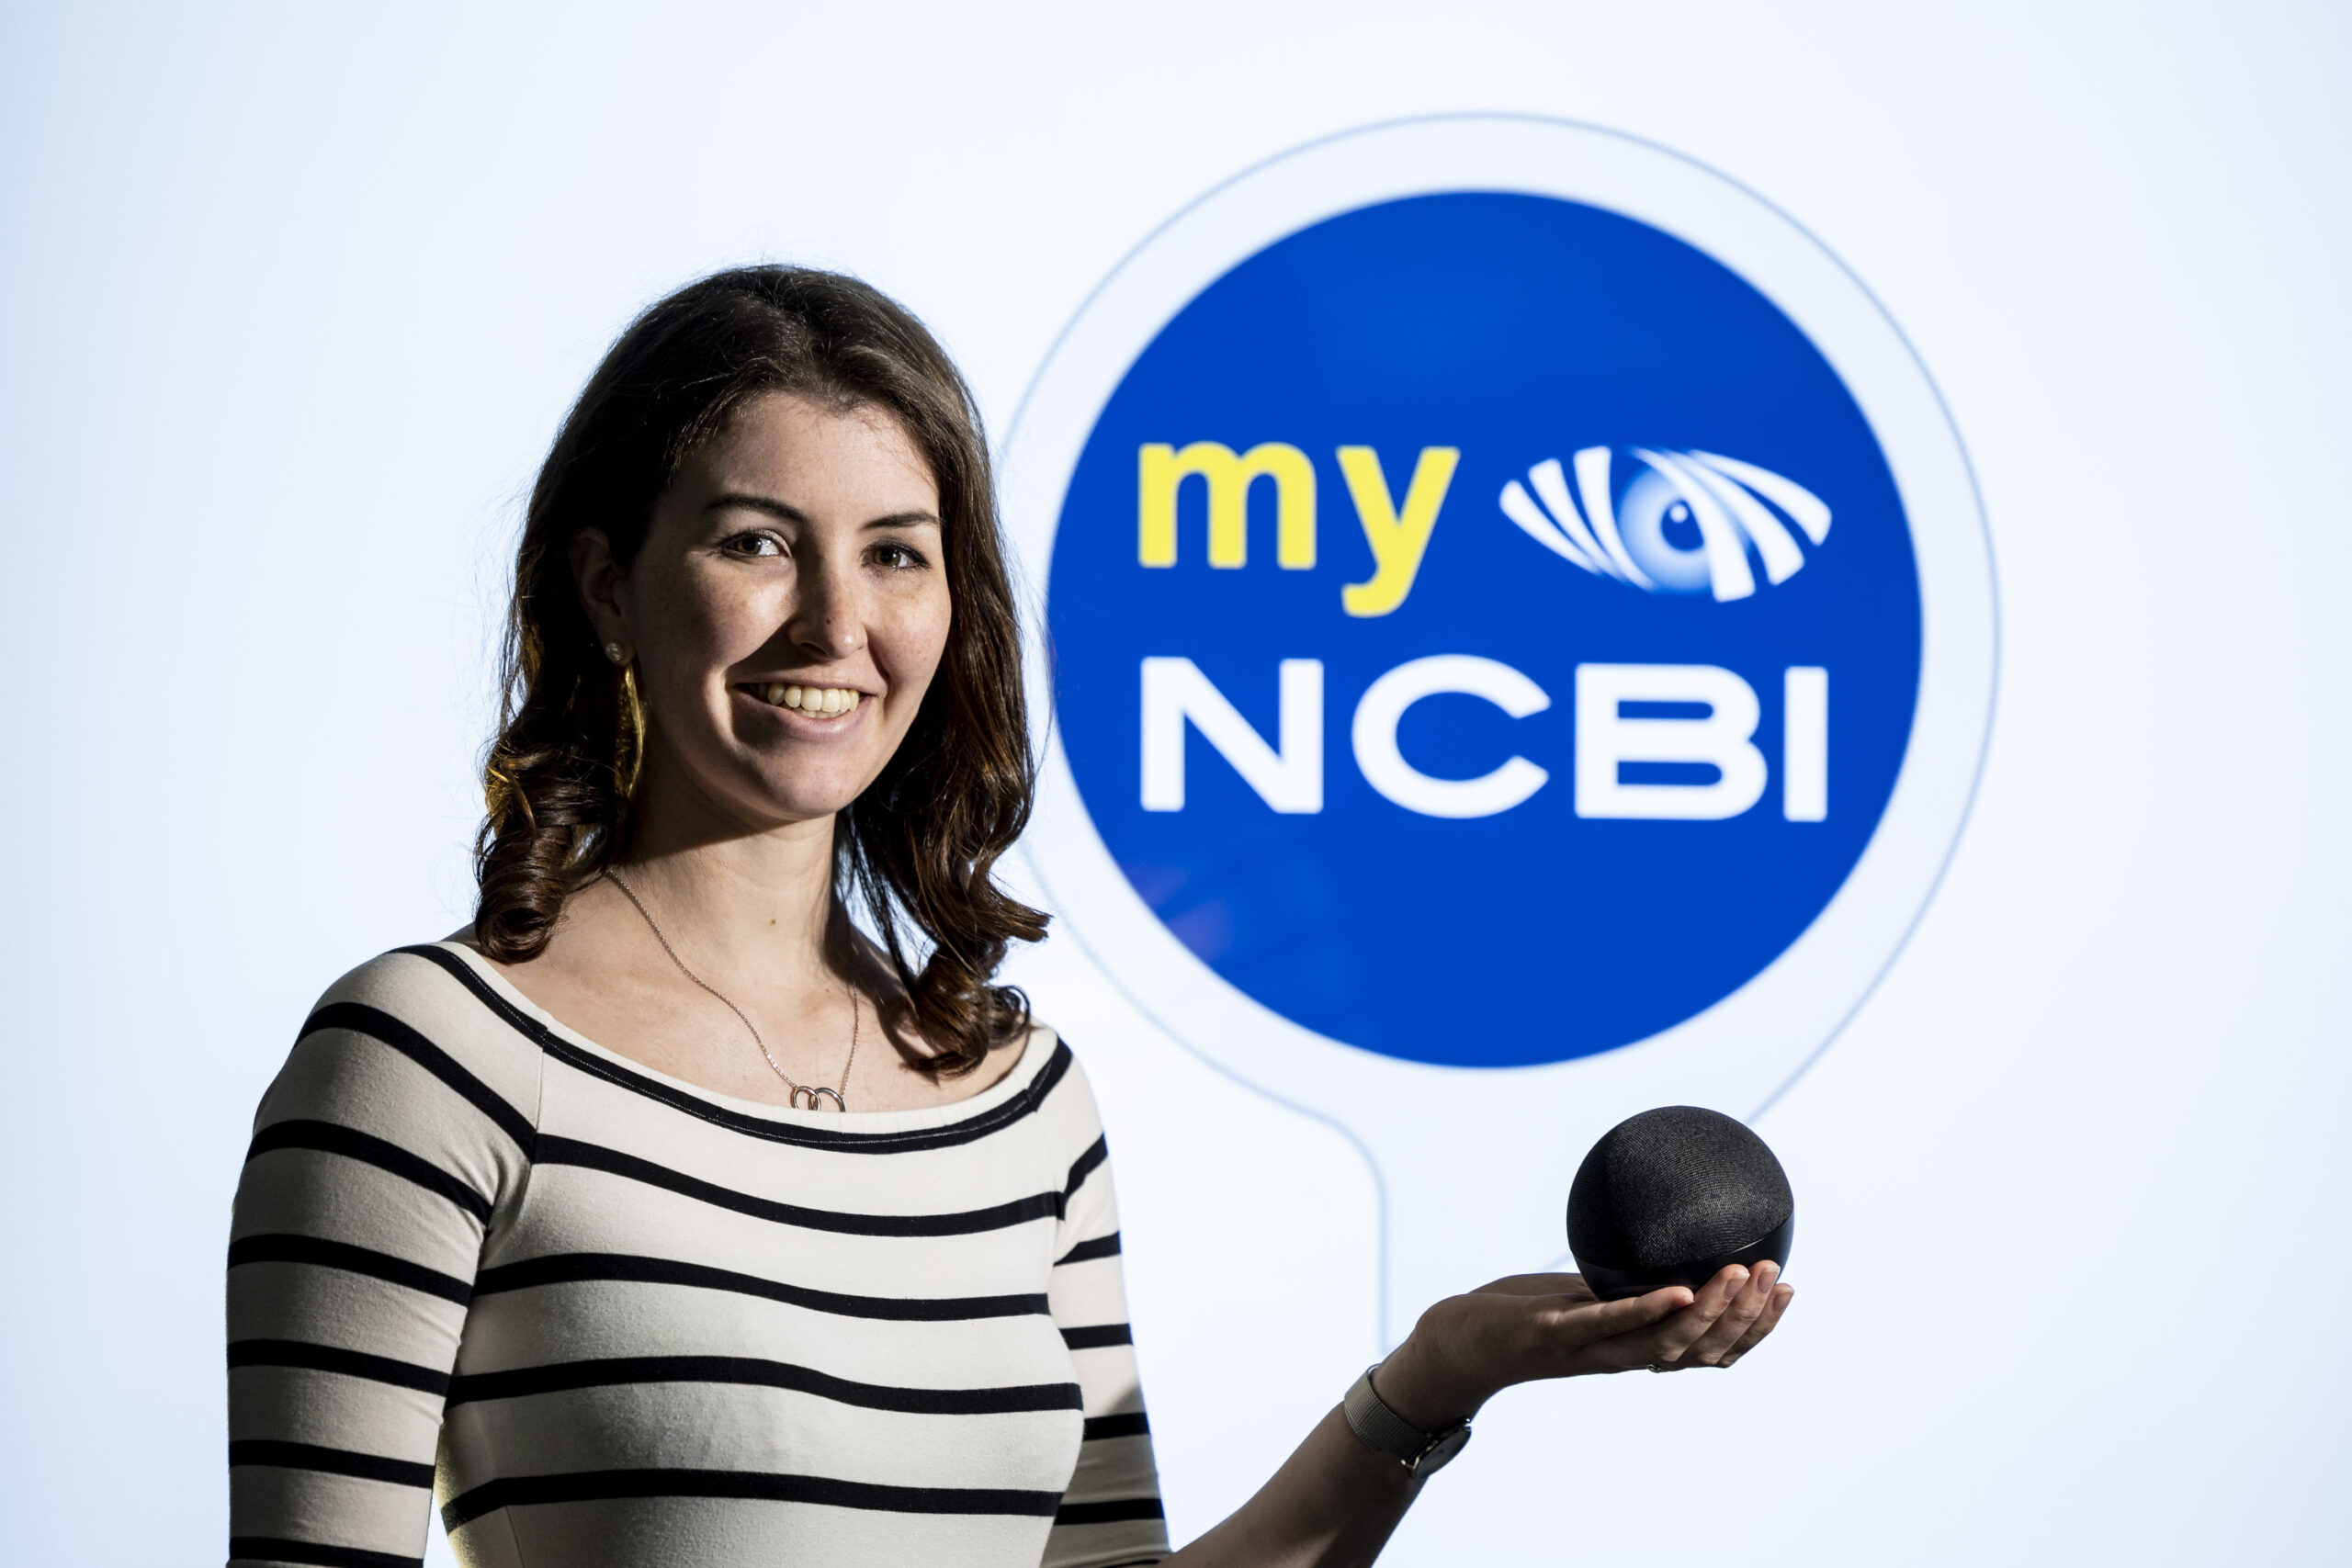 A young woman with dark hair is wearing a white top with black stripes. She is holding a smart speaker in front of the myNCBI Smart Hub logo, which is inside a blue circle.